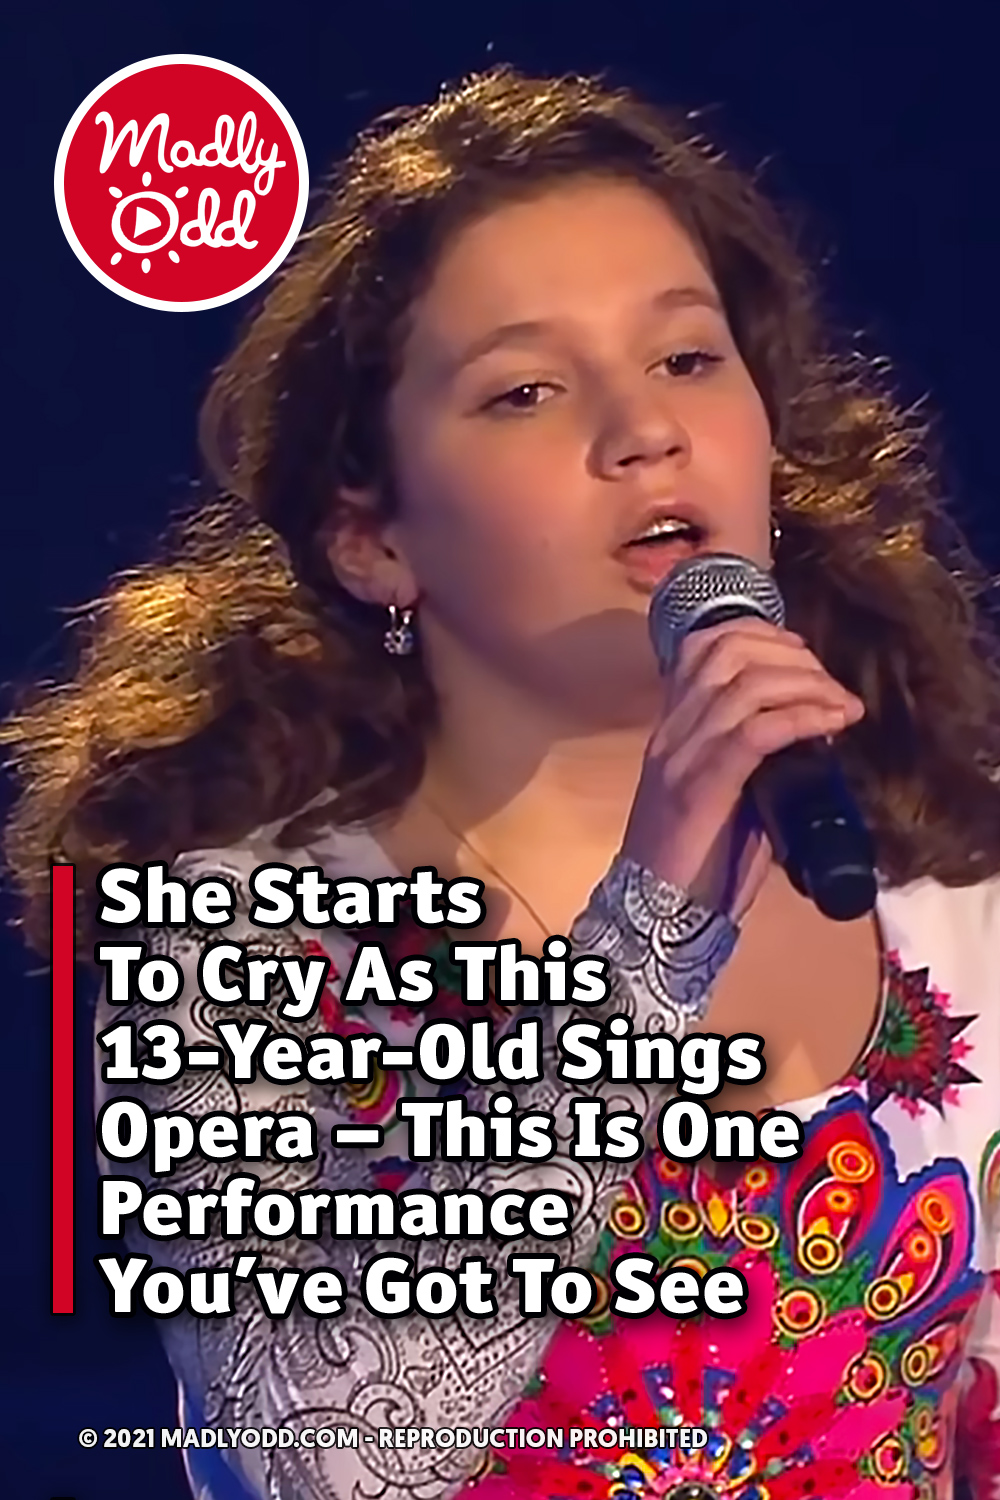 She Starts To Cry As This 13-Year-Old Sings Opera - This Is One Performance You’ve Got To See